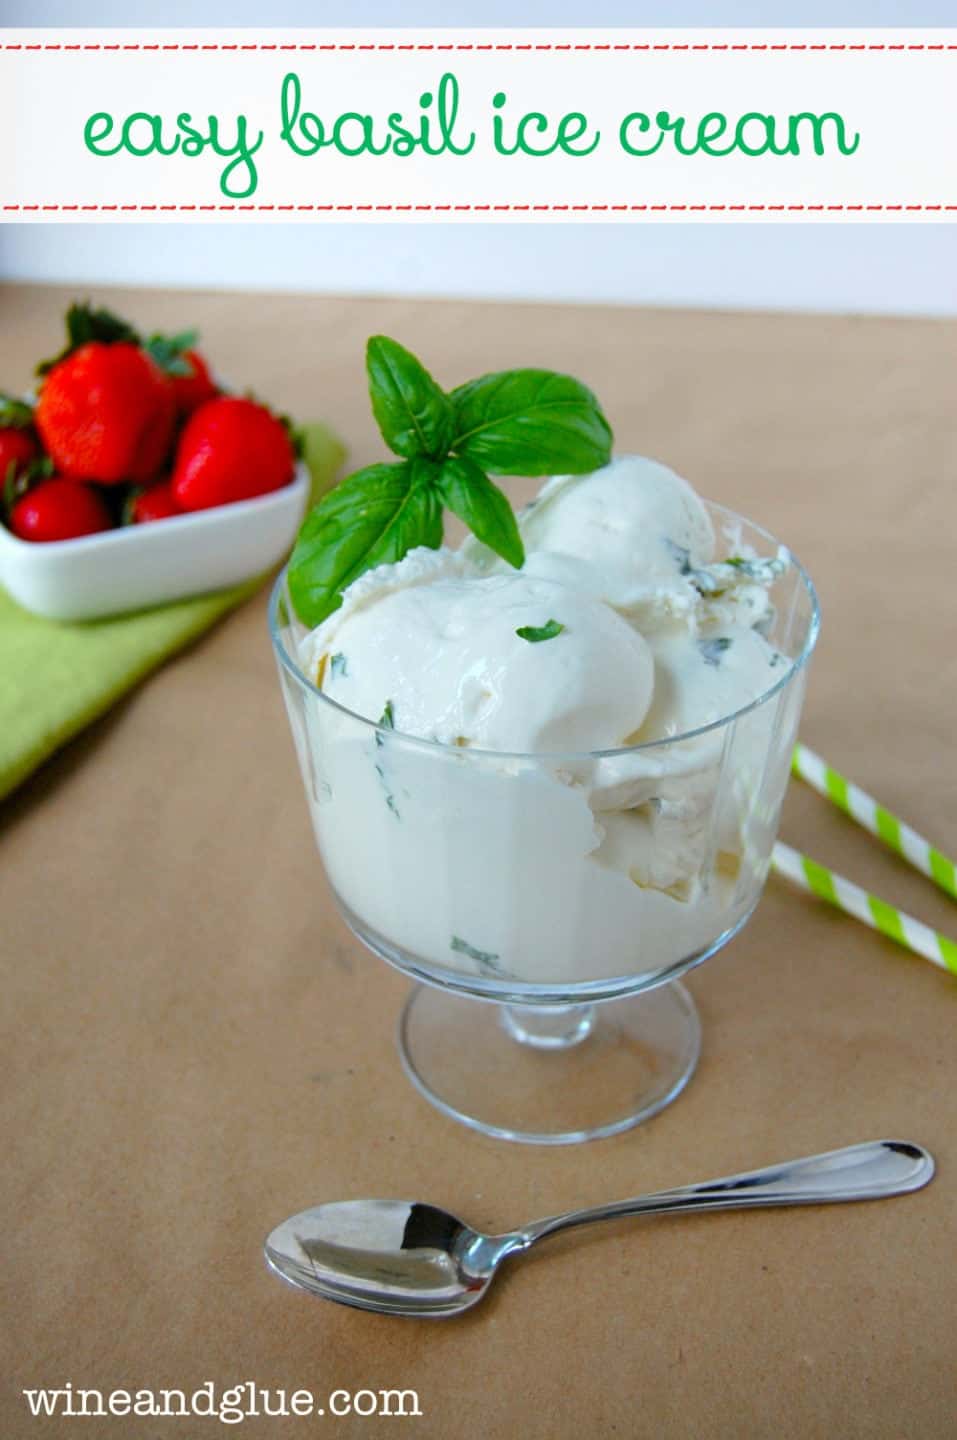 Basil Ice Cream! The delicious flavor of basil in sweet ice cream that comes together quickly without a machine! via www.wineandglue.com